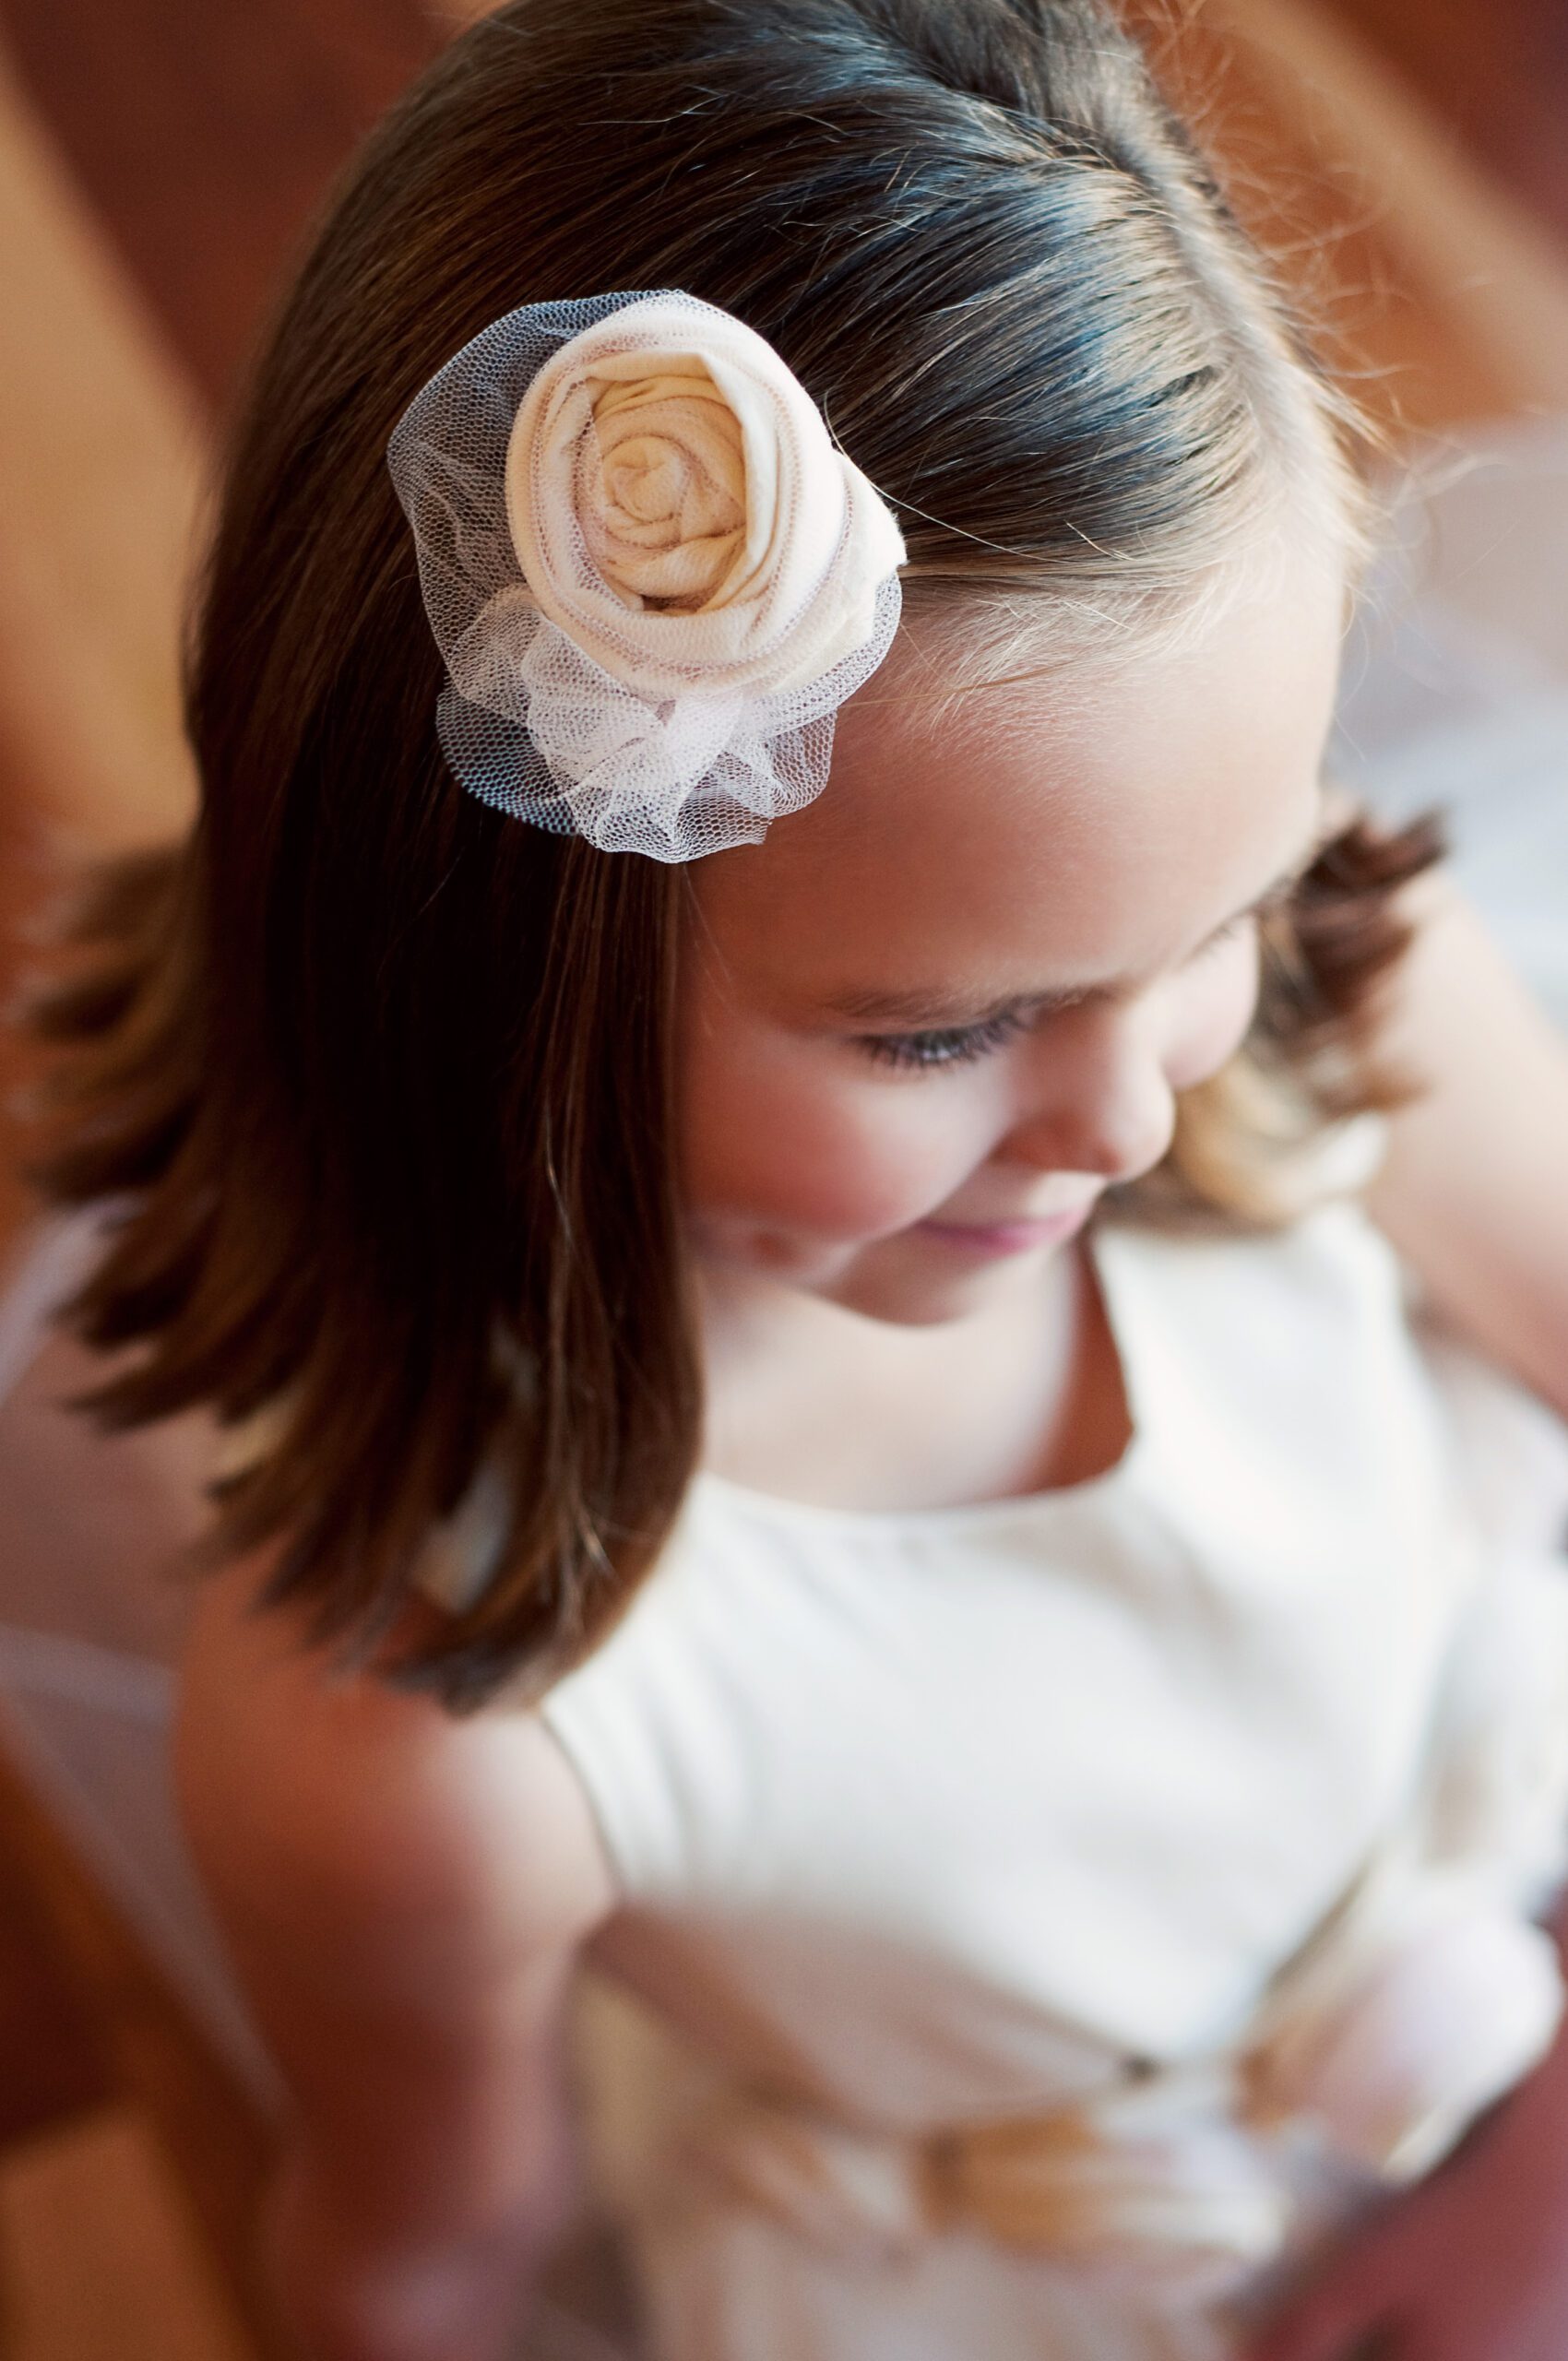 A photo of a cotton flower girl dress in ivory with flowers on the sash